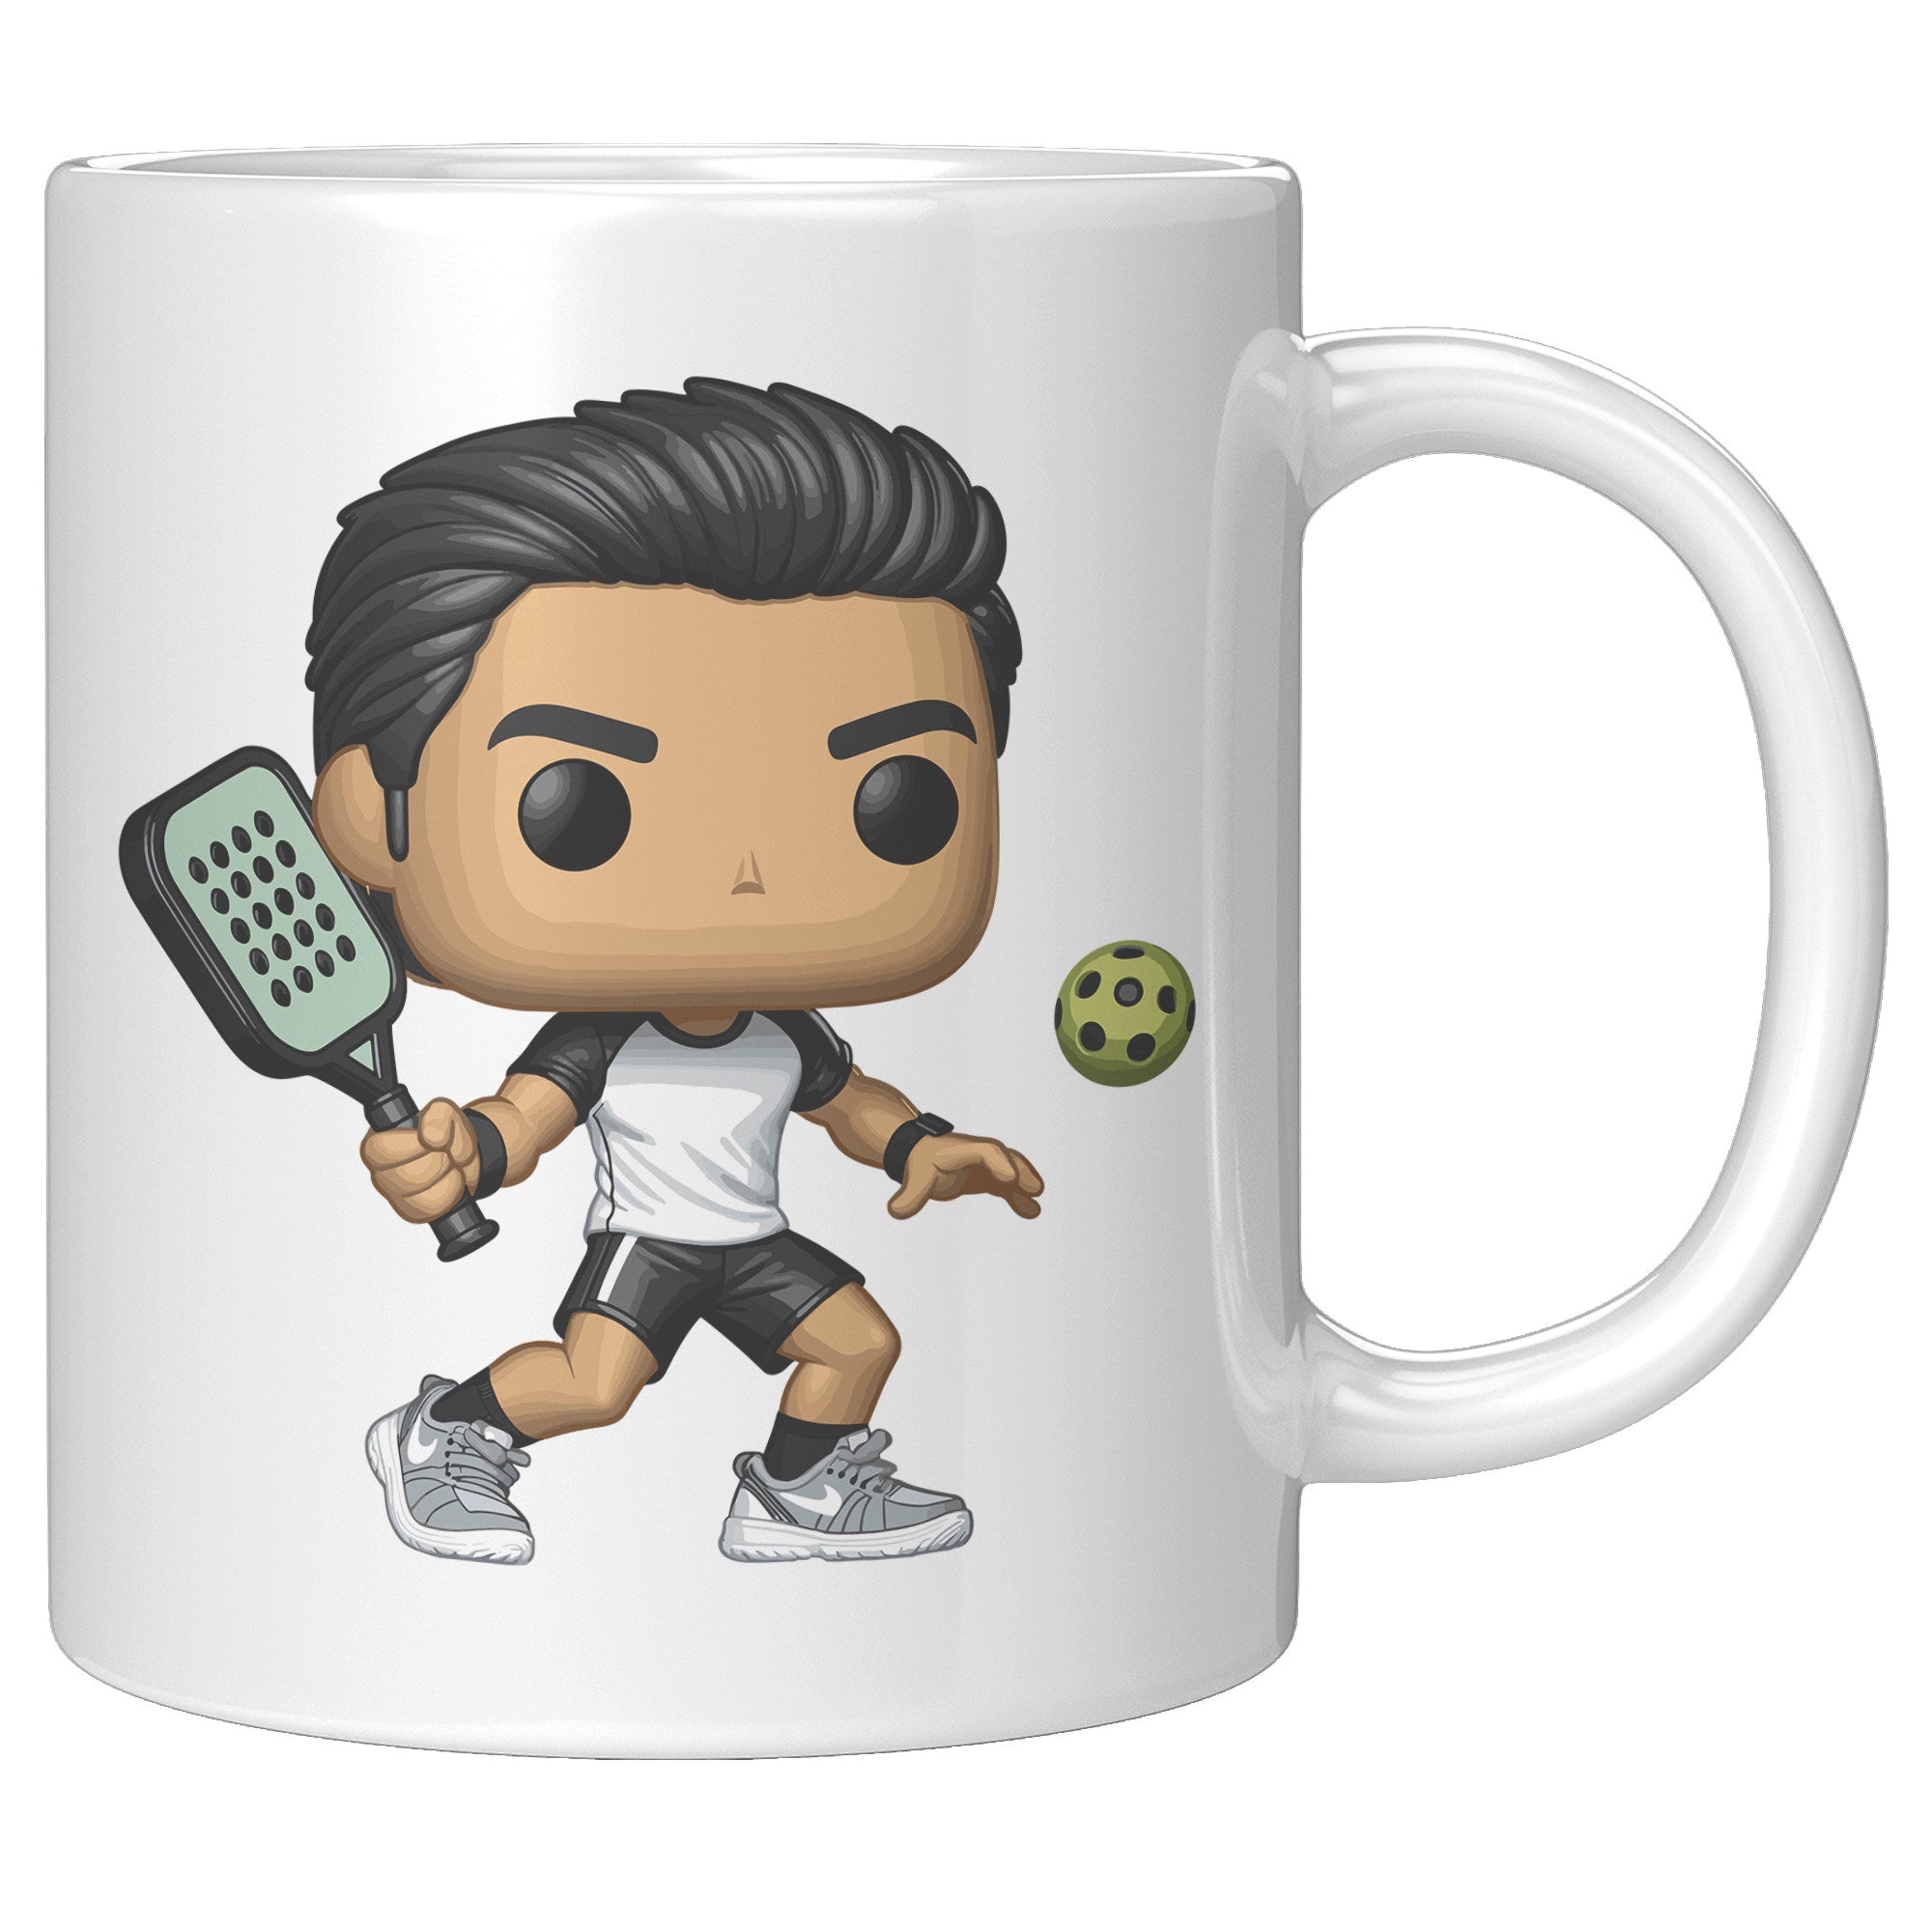 "Funko Pop Style Pickle Ball Player Boy Coffee Mug - Cute Athletic Cup - Perfect Gift for Pickle Ball Enthusiasts - Sporty Boy Apparel" - H